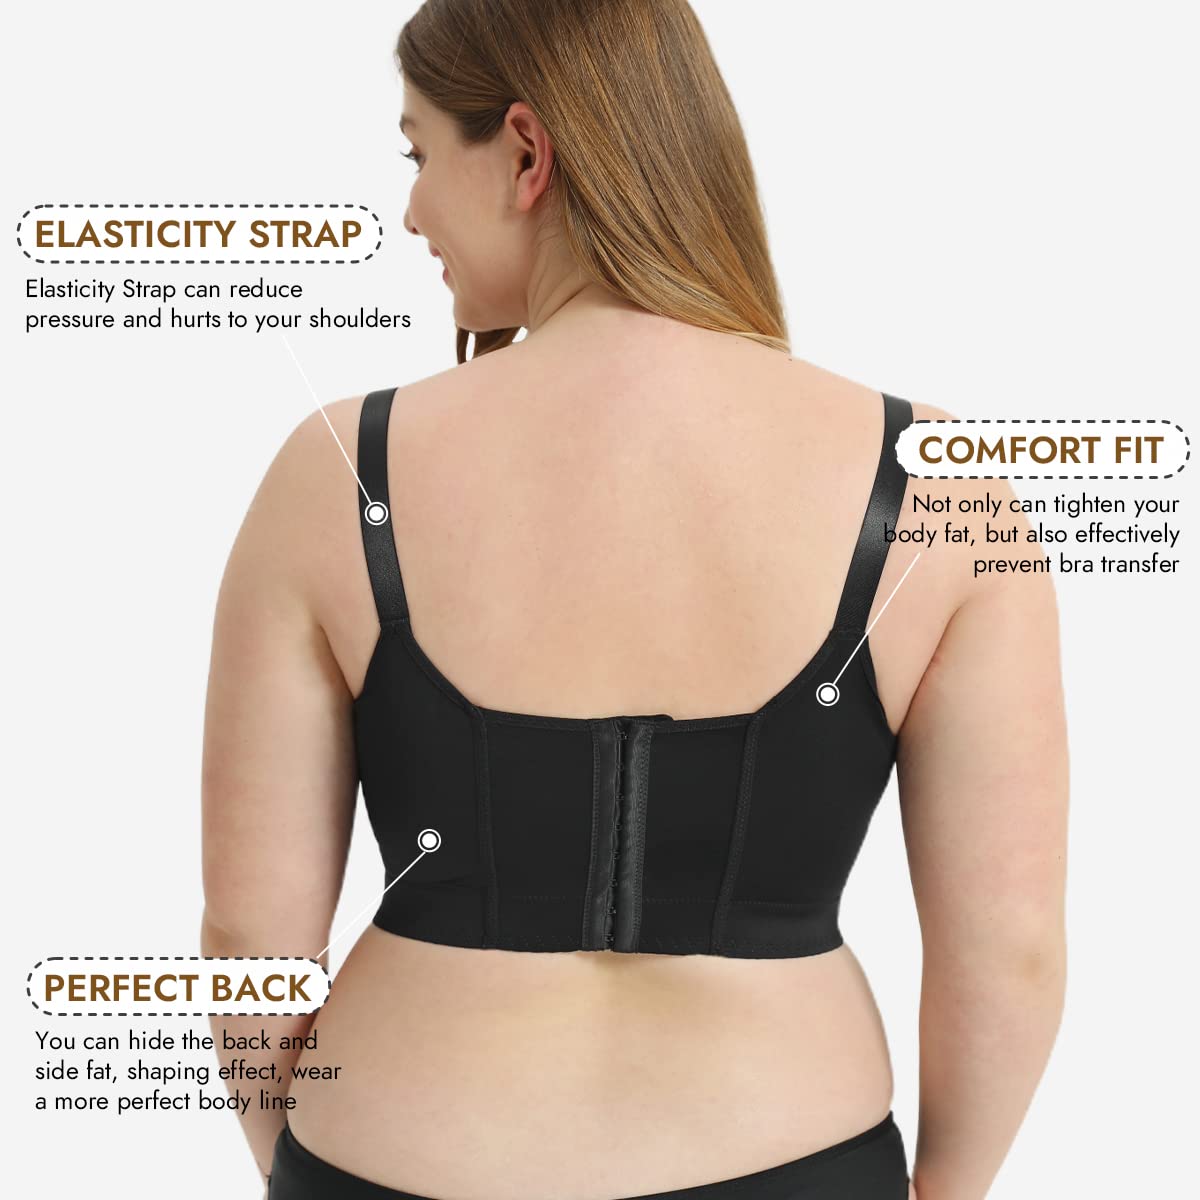 Say Goodbye to Back Fat: The Ultimate Guide to Finding the Best Bra for Back  FatSay Goodbye to Back Fat: The Ultimate Guide to Finding the Best Bra for  Back Fat